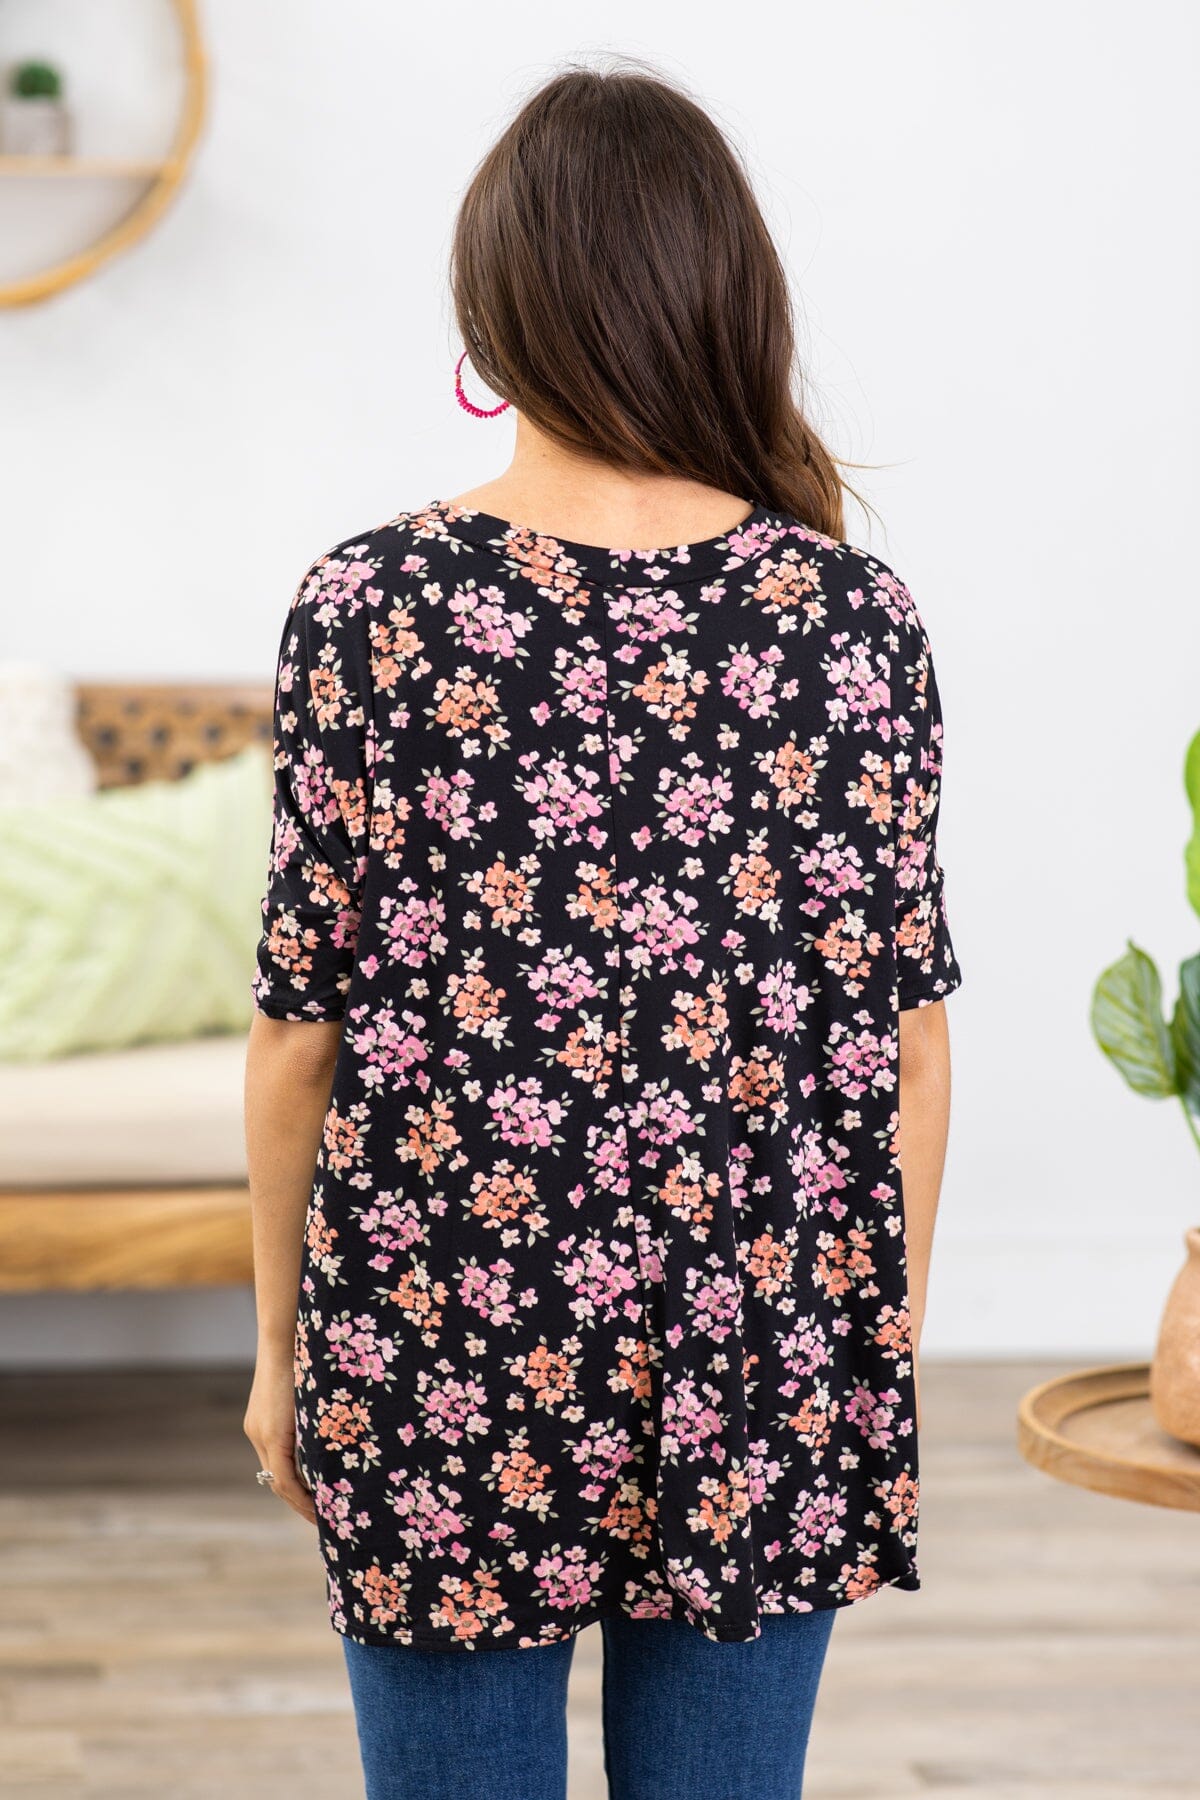 Black and Pink Floral Print V-Neck Top - Filly Flair